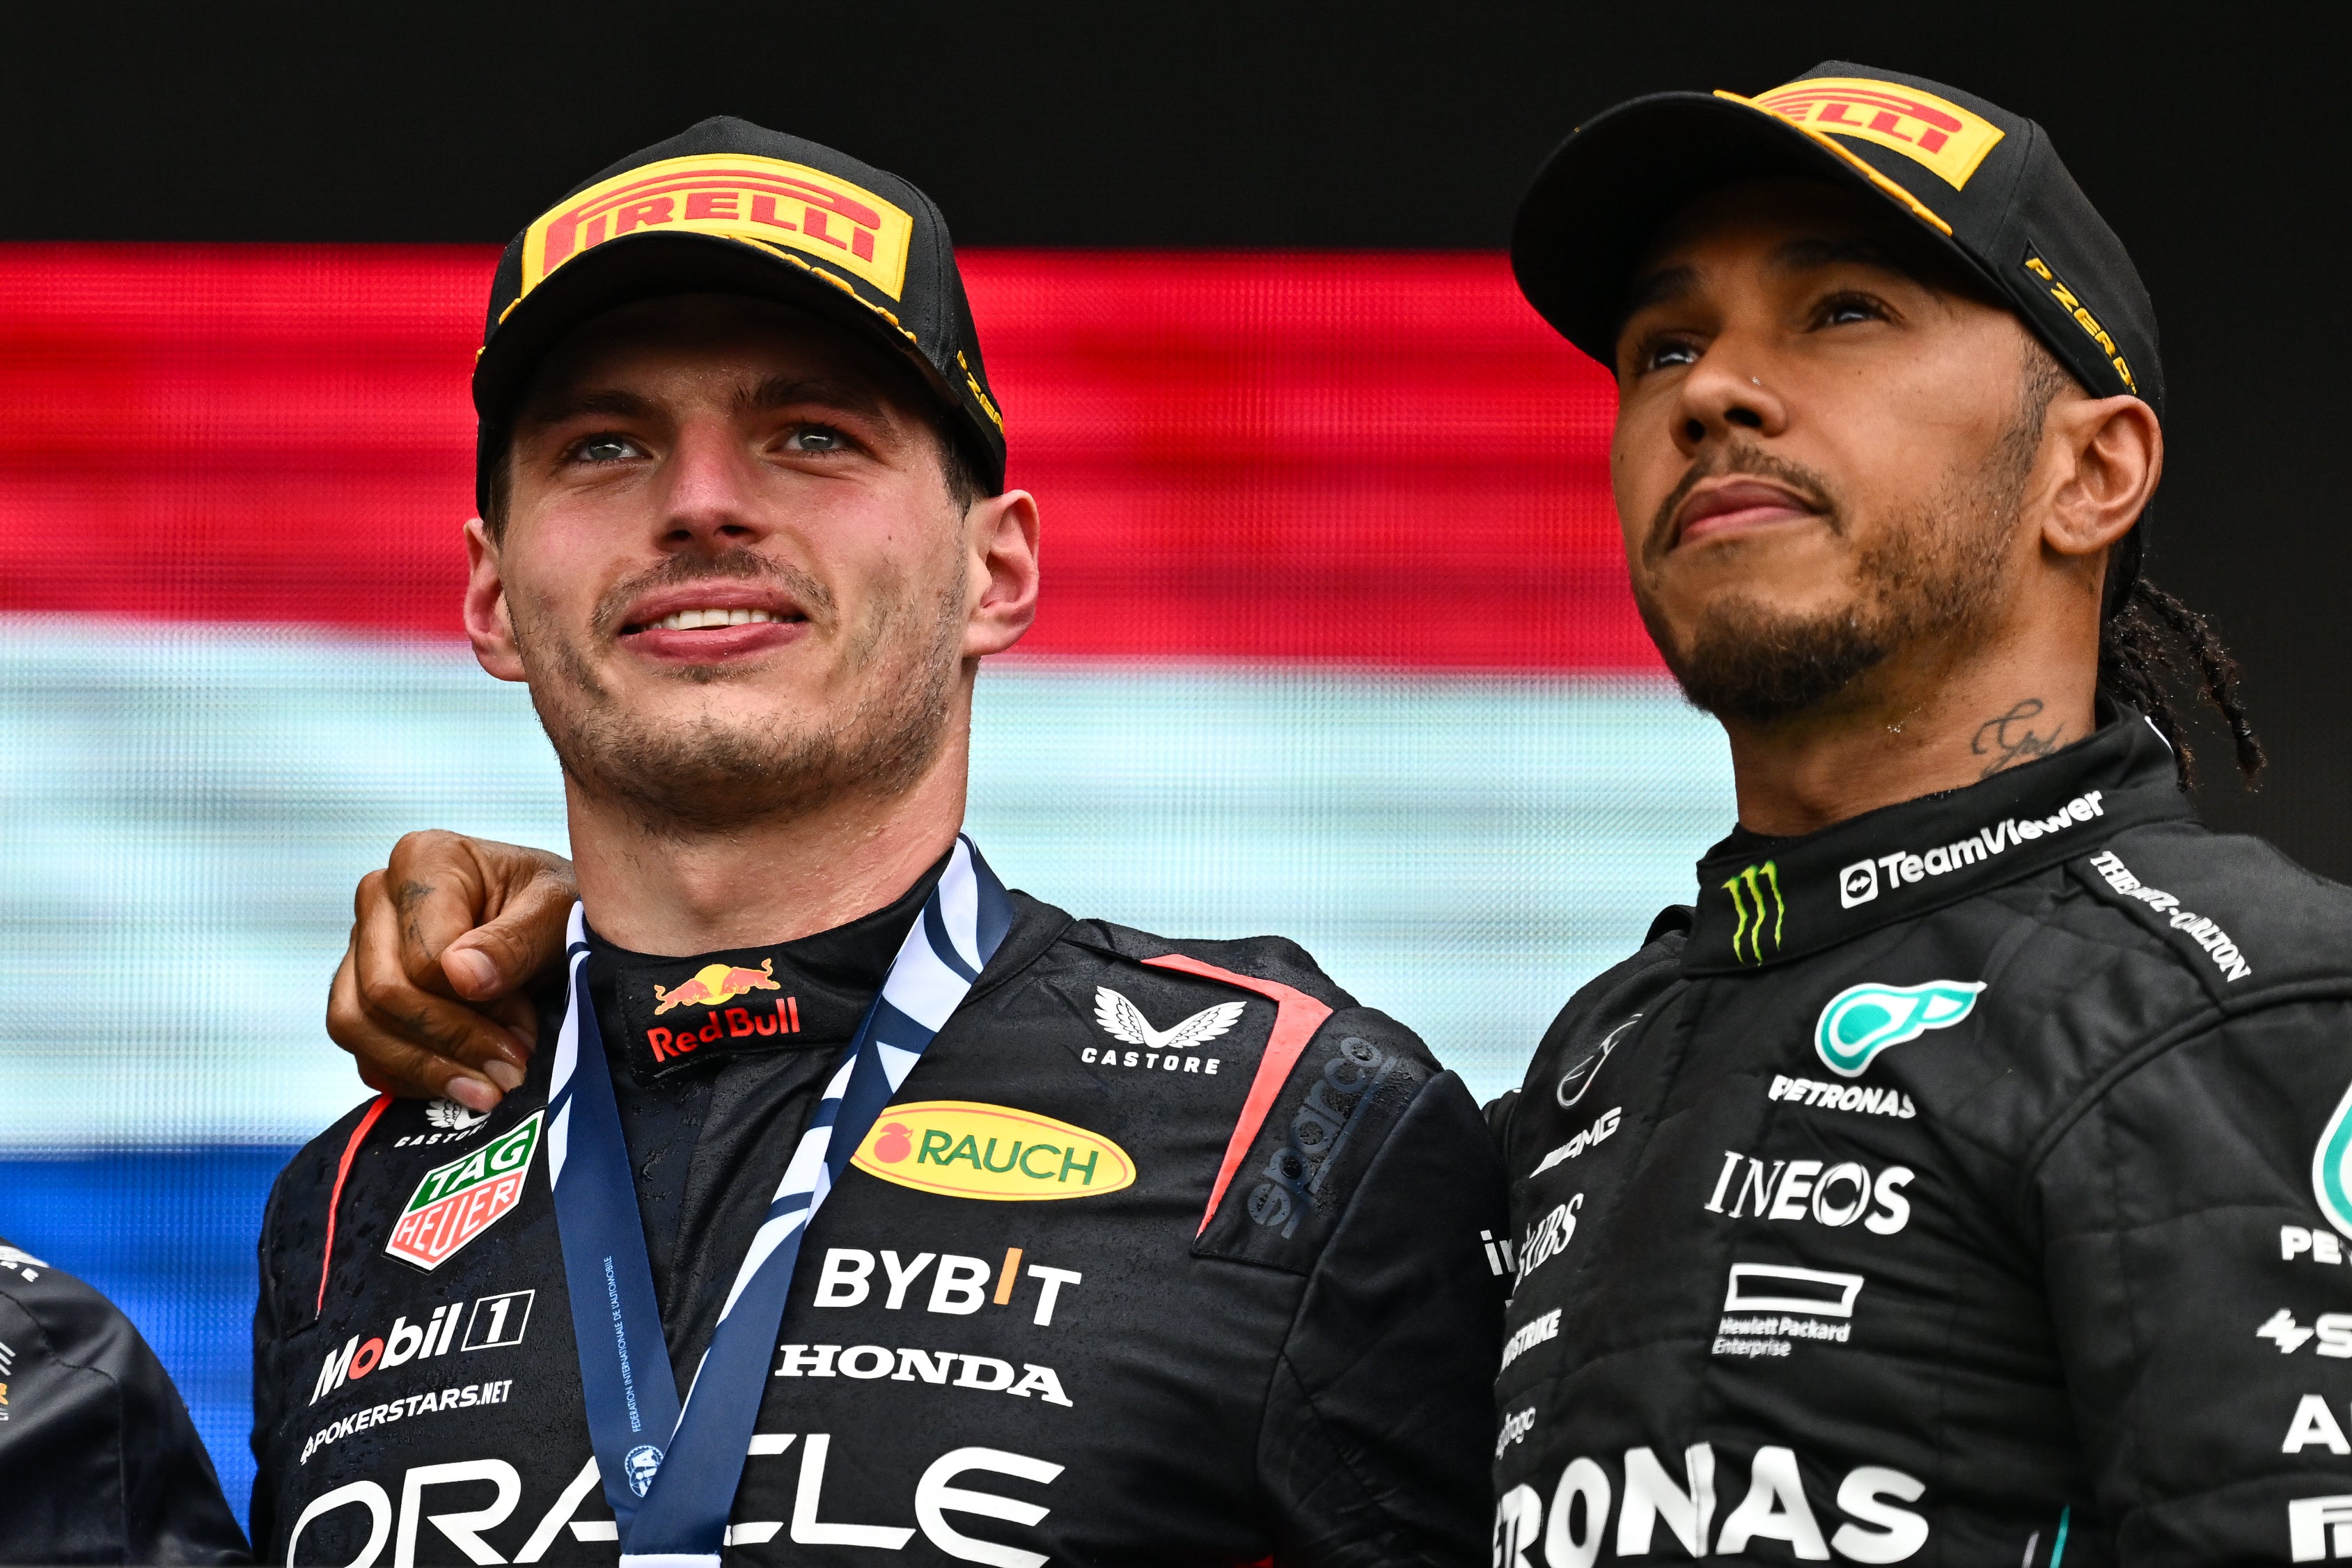 Max Verstappen insists he was ‘not shocked’ by Lewis Hamilton’s move to Ferrari